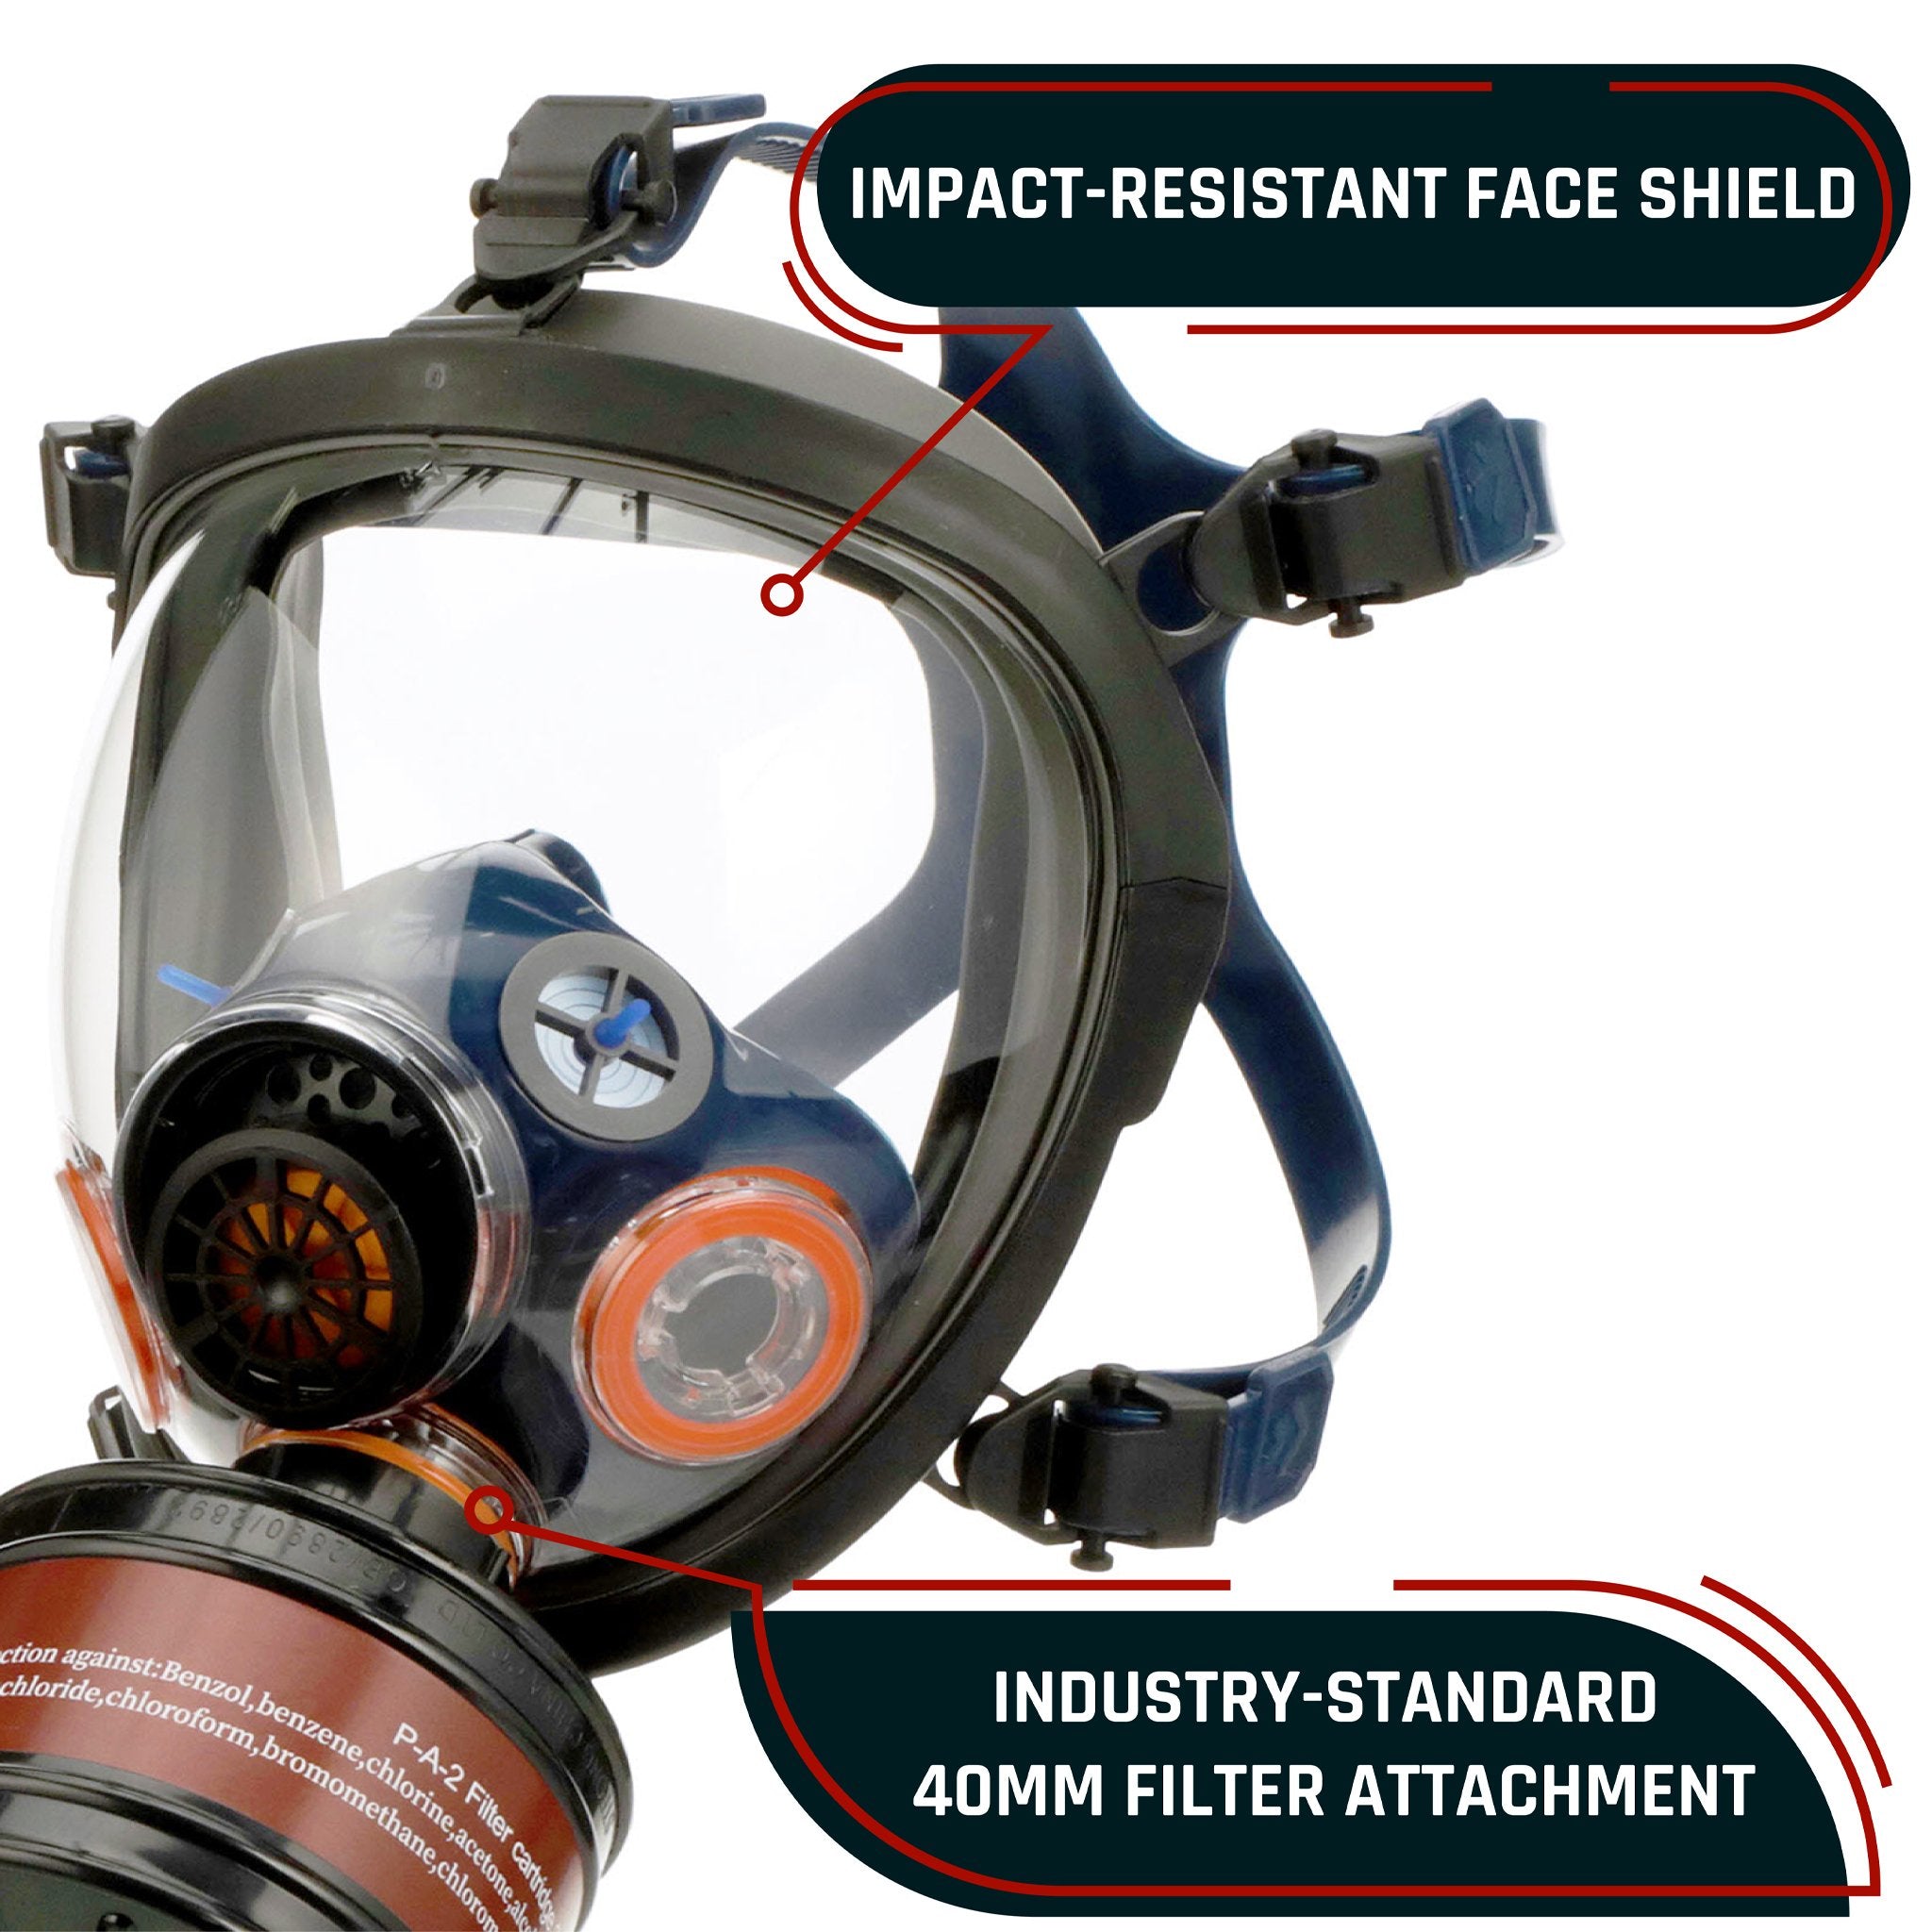 Load image into Gallery viewer, ST - 100X Burnt Bronze Mirrored - Full Face Respirator Gas Mask with Organic Vapor and Particulate Filtration - Parcil SafetyGas MasksGas MasksParcil Safety